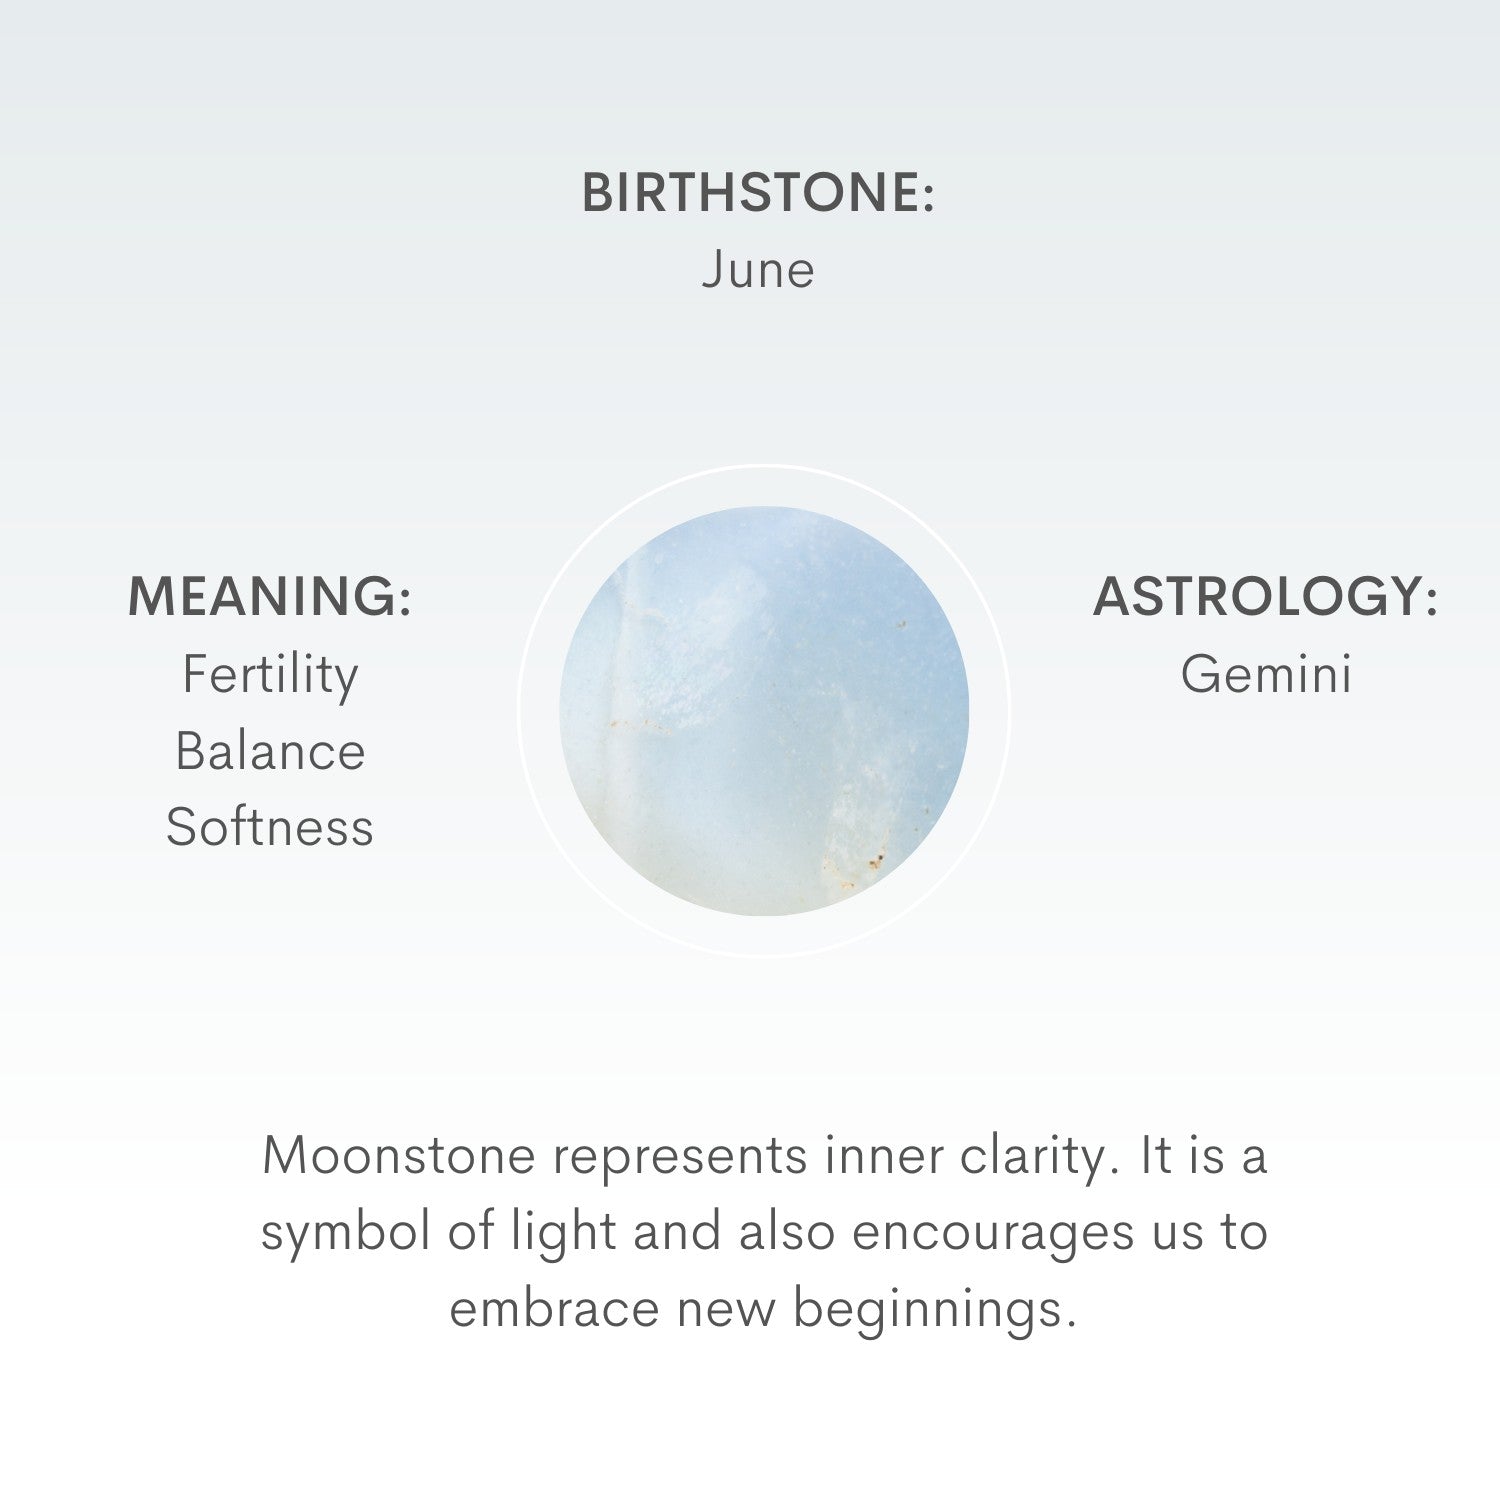 Moonstone represents inner clarity, cyclical change and a connection to the feminine. It is a symbol of light and hope and also encourages us to embrace new beginnings.